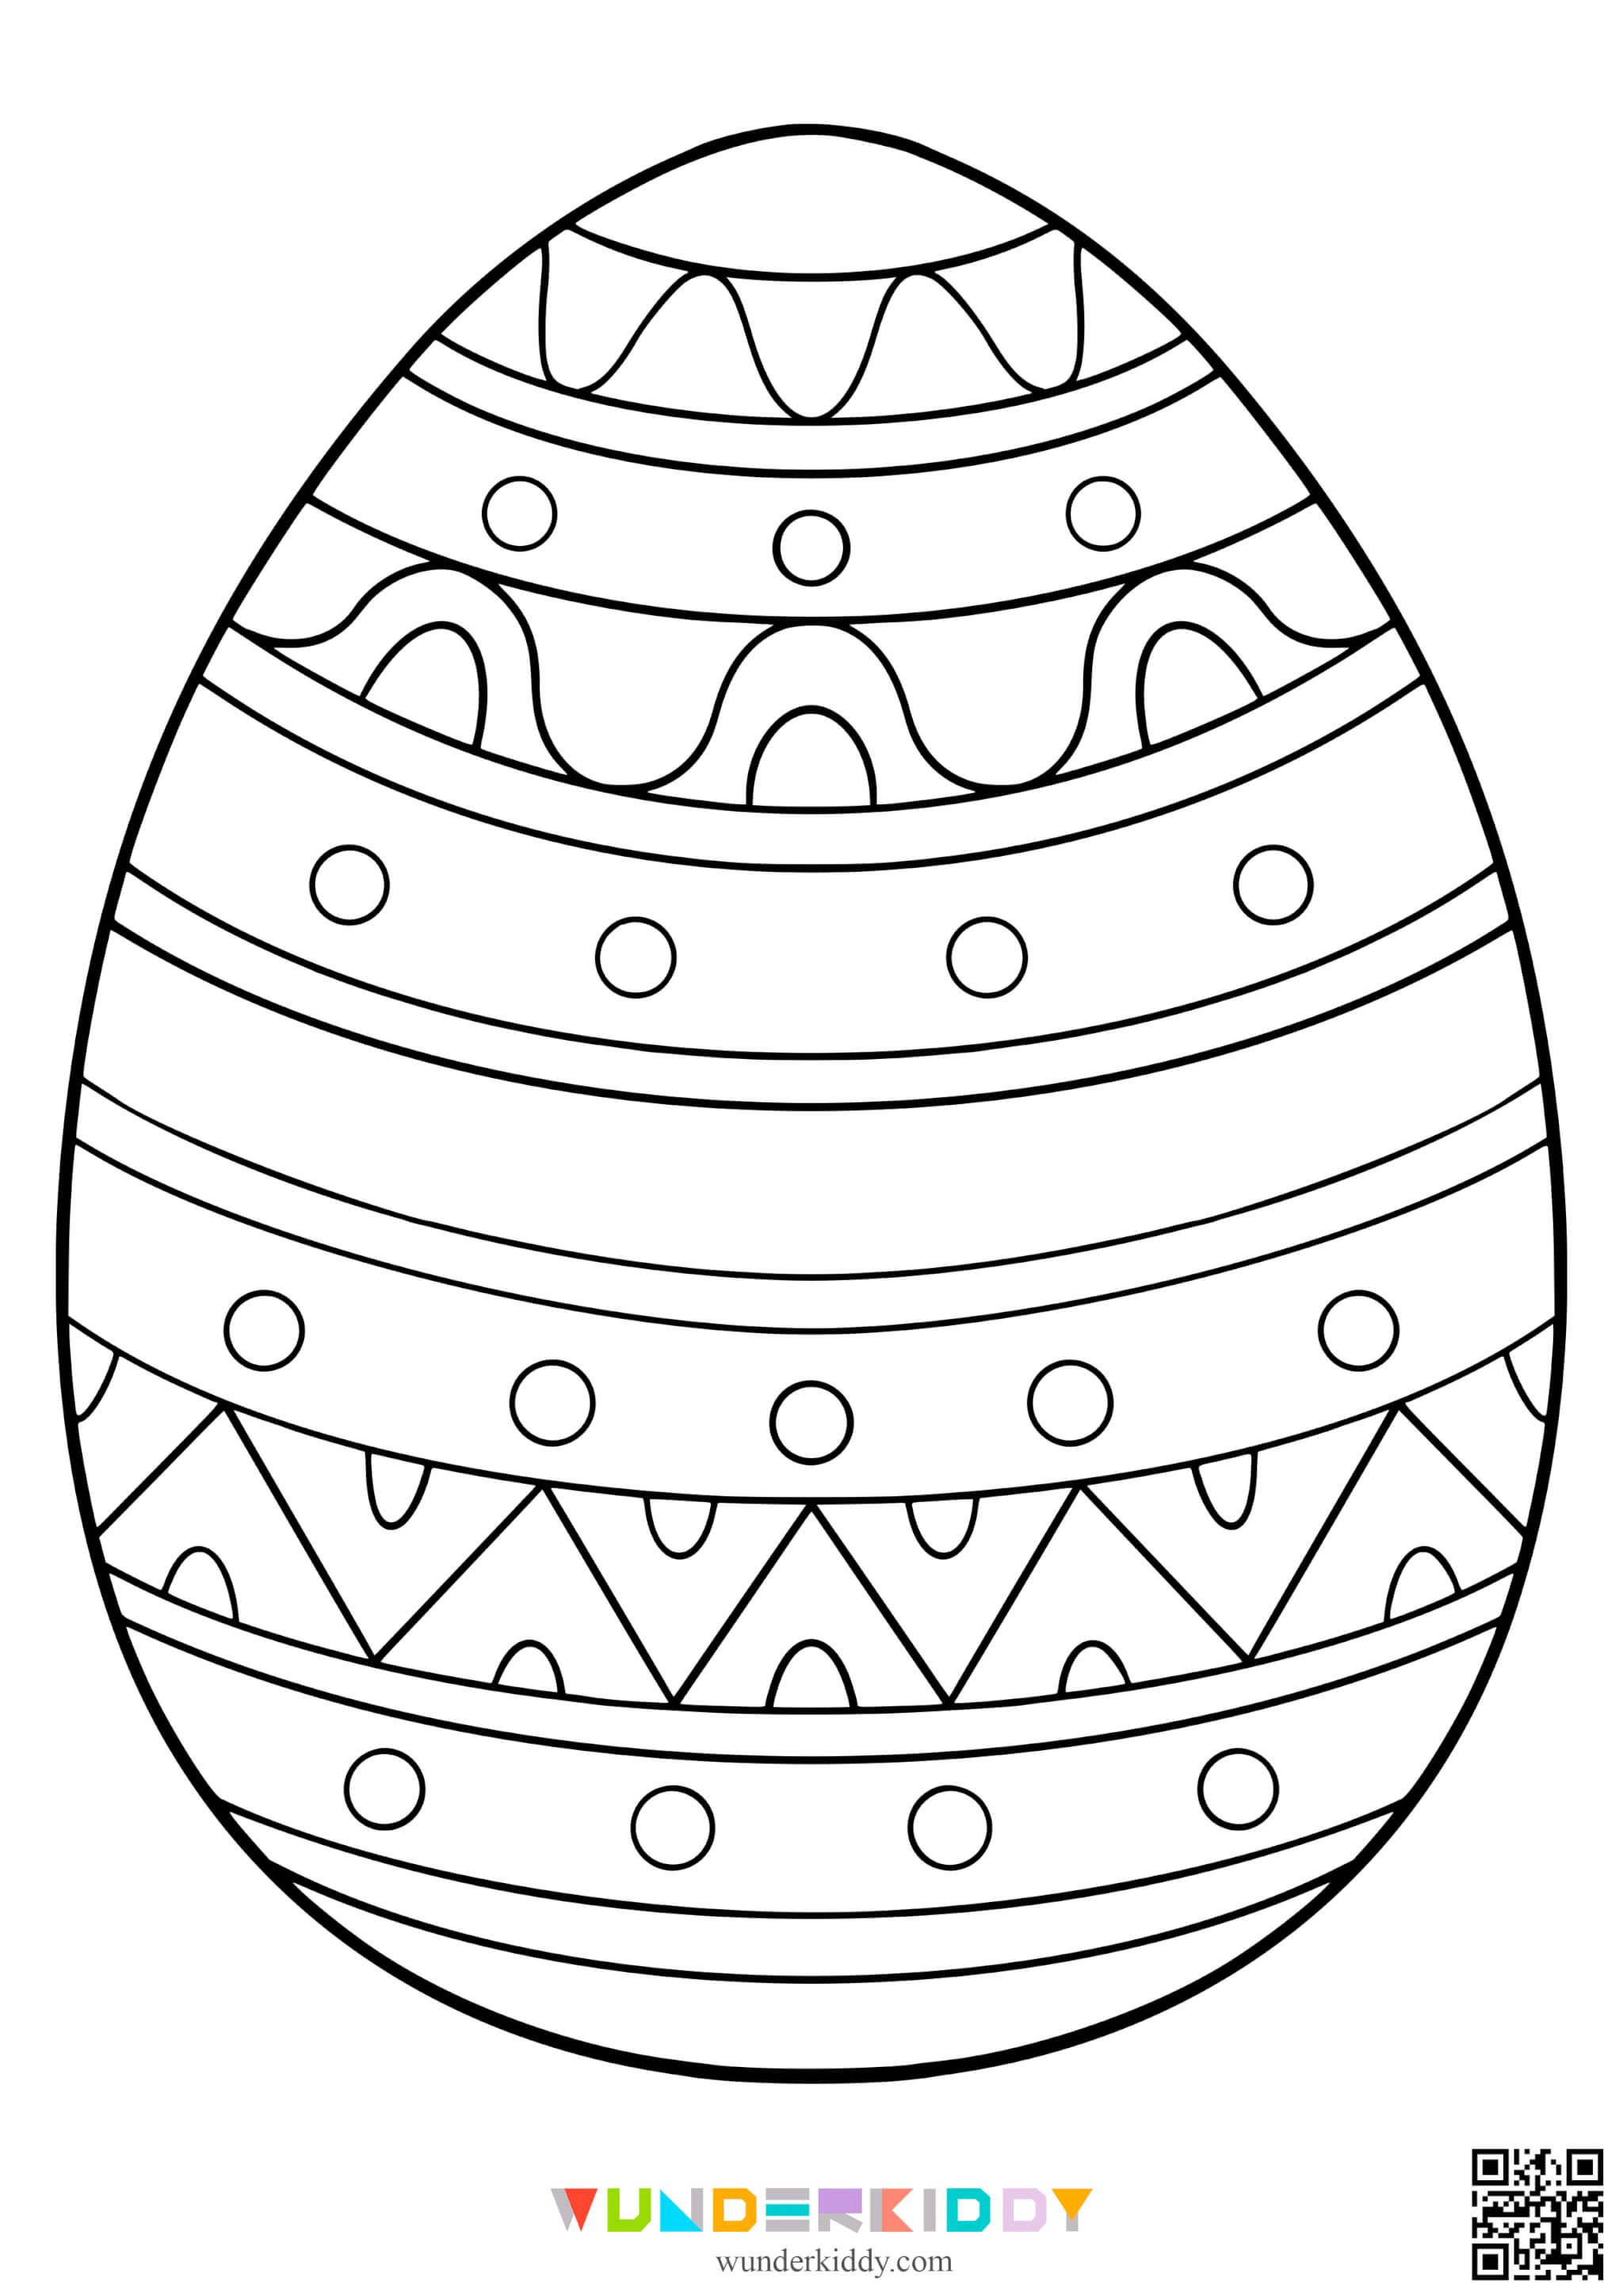 Easter Egg Template Colouring Page - Image 5